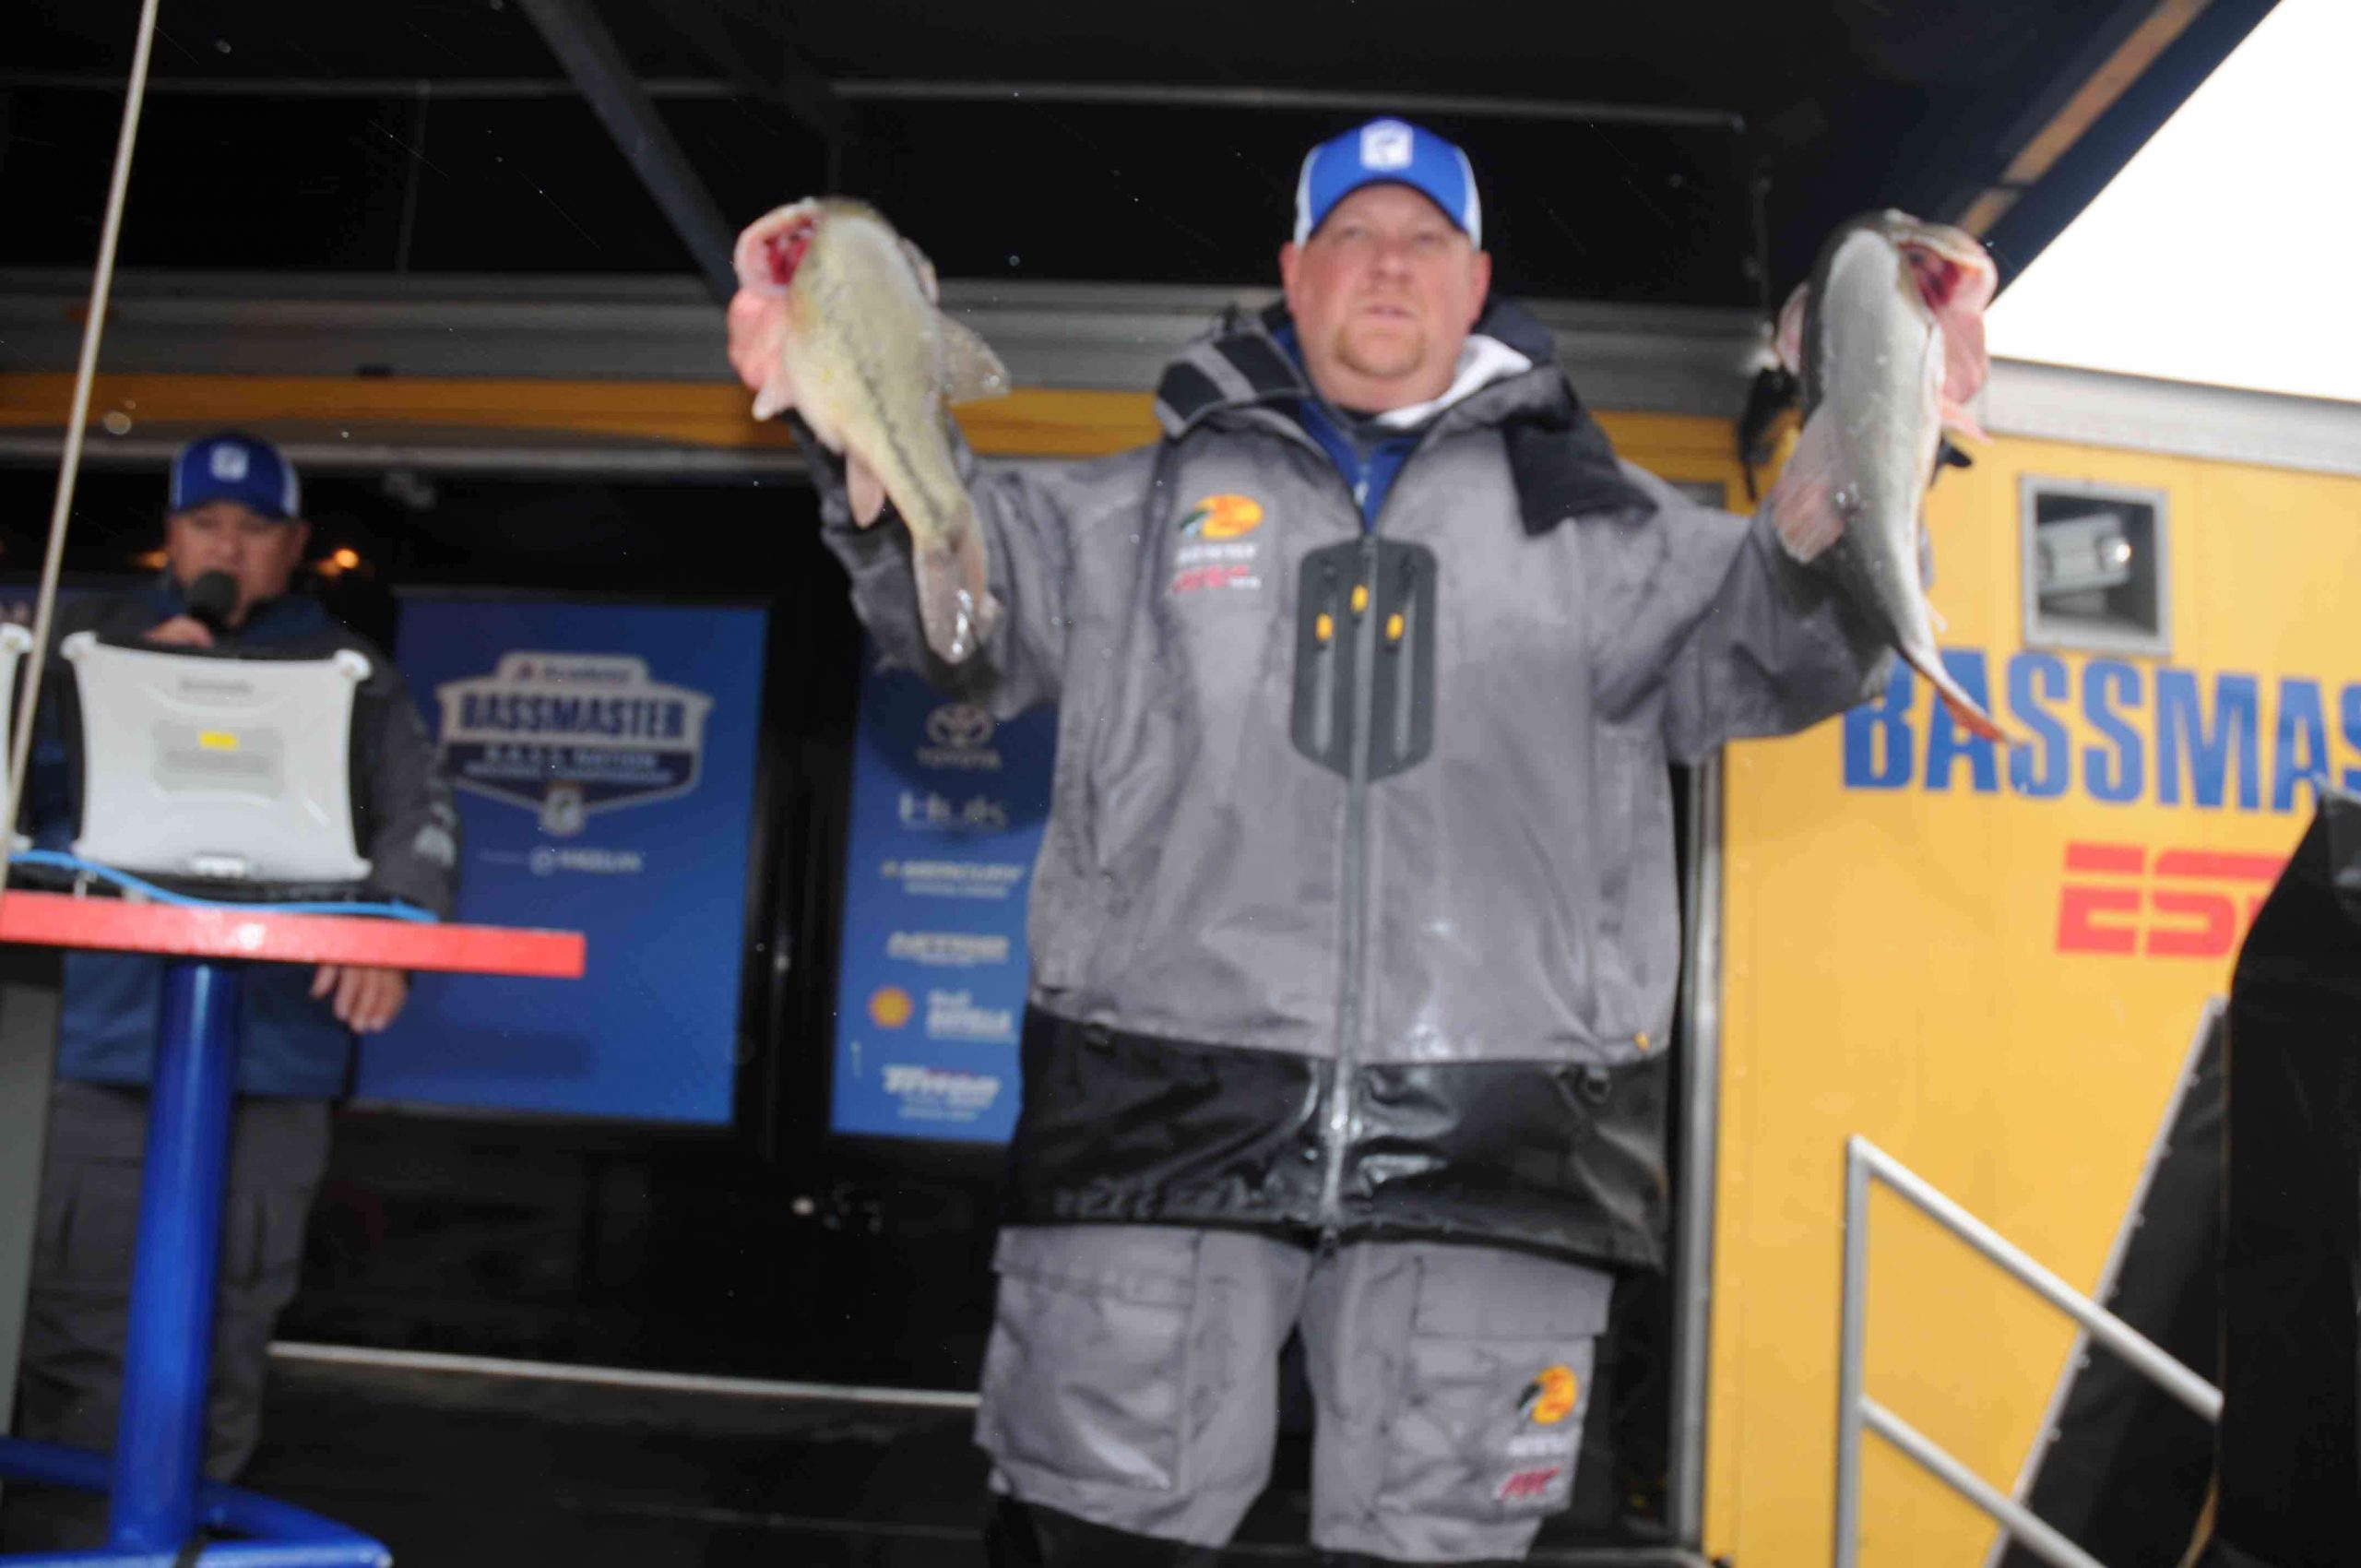 Indiana boater Chris Wilkinson weighed 18 pounds for the first day.
